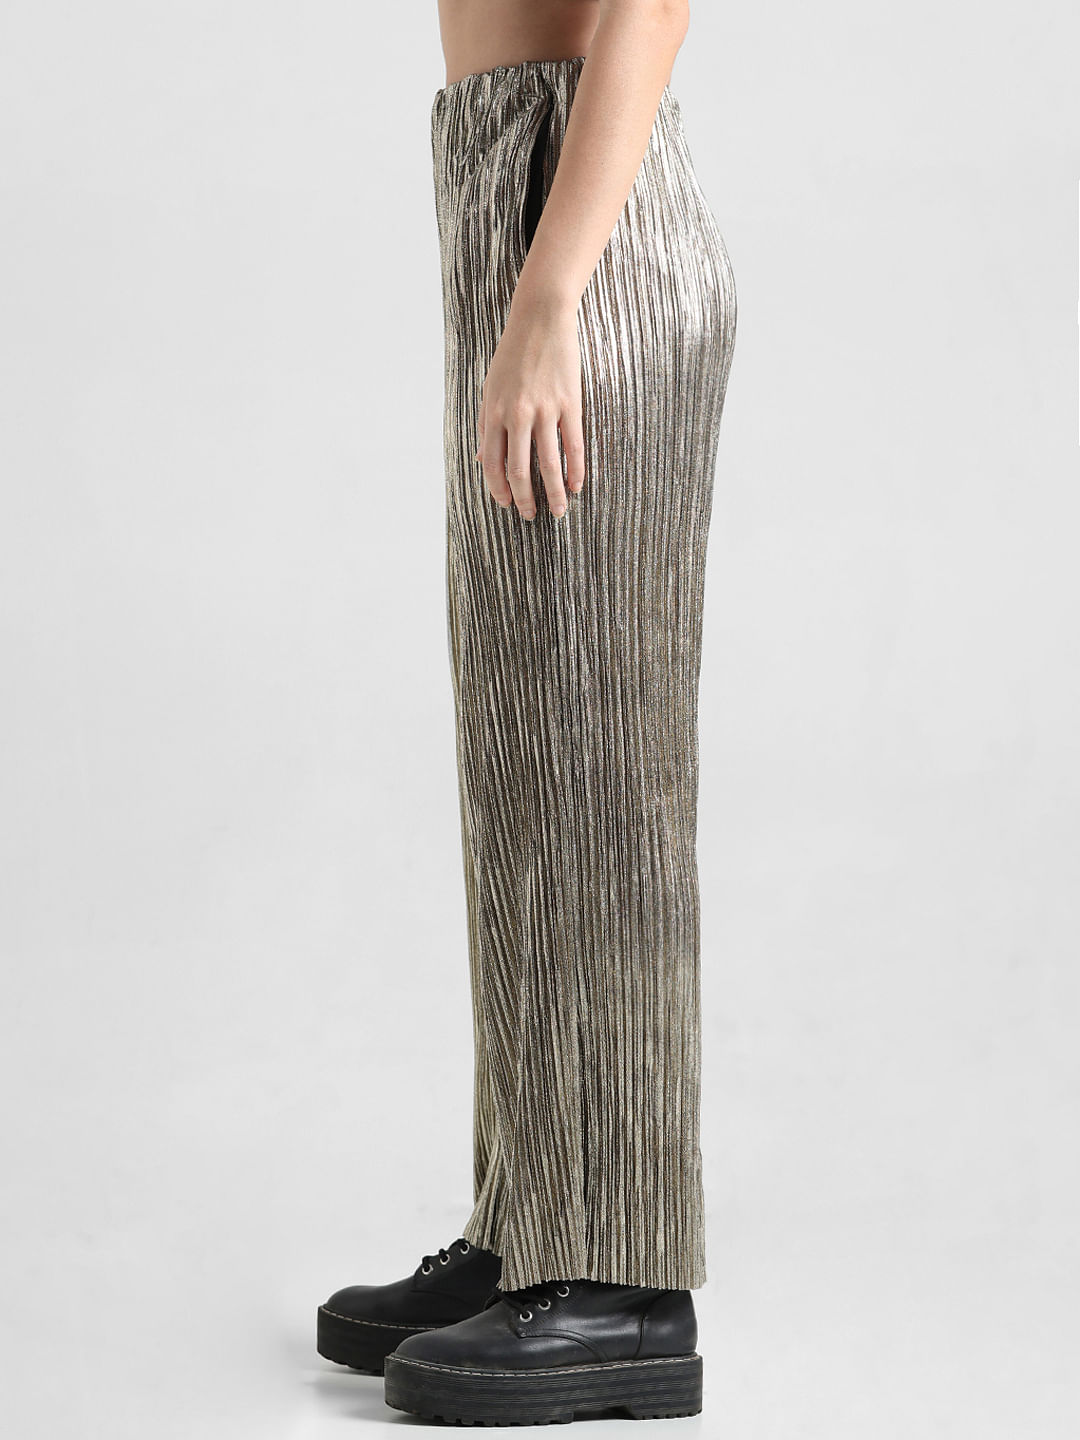 JITROIS Silver Metallic Leather Stretch Pleated Slim Fit Trousers Pants 40  UK10 | eBay